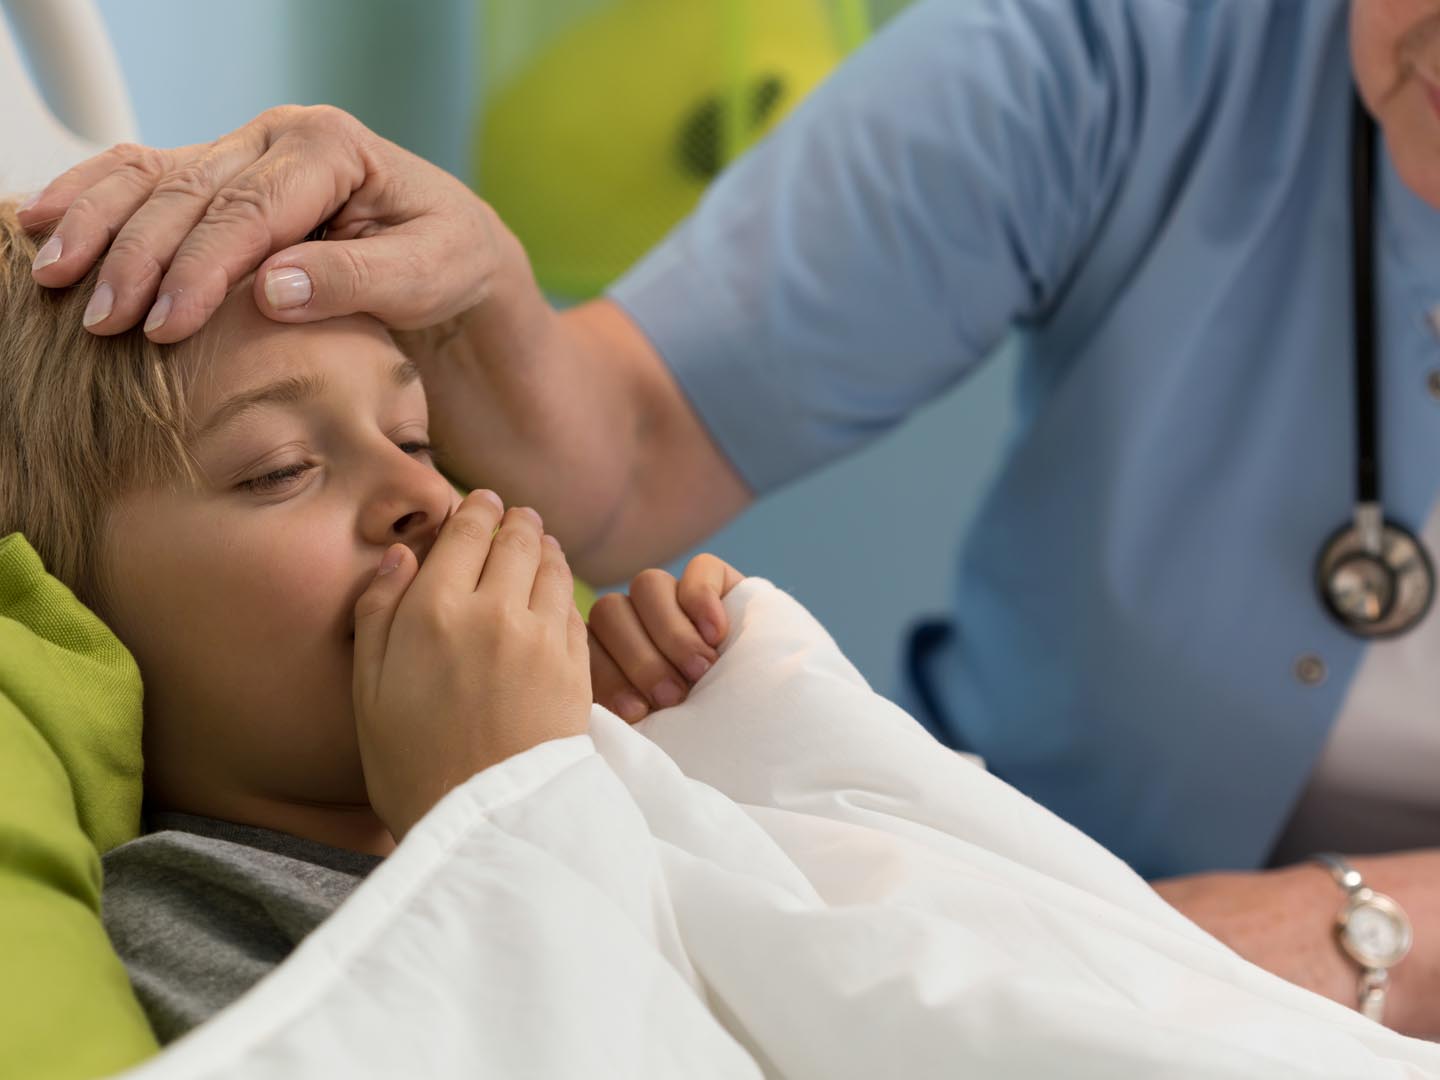 A girl laying down coughing with one of her hand covering her mouth and a nurse beside her with one of her hand on the girl's forehead